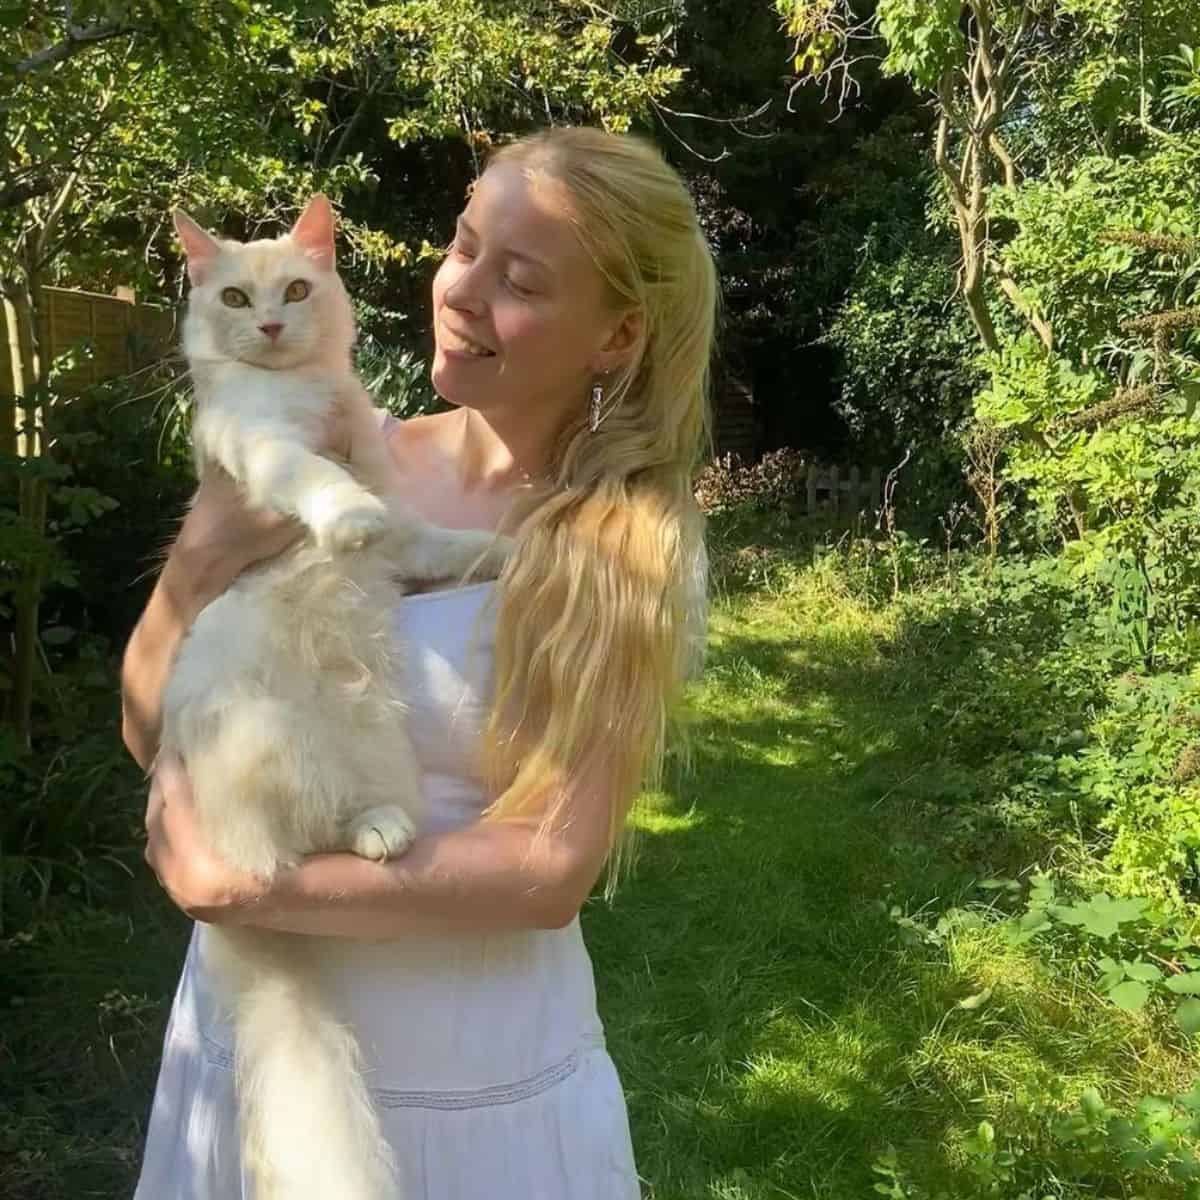 blond woman with cat in arms